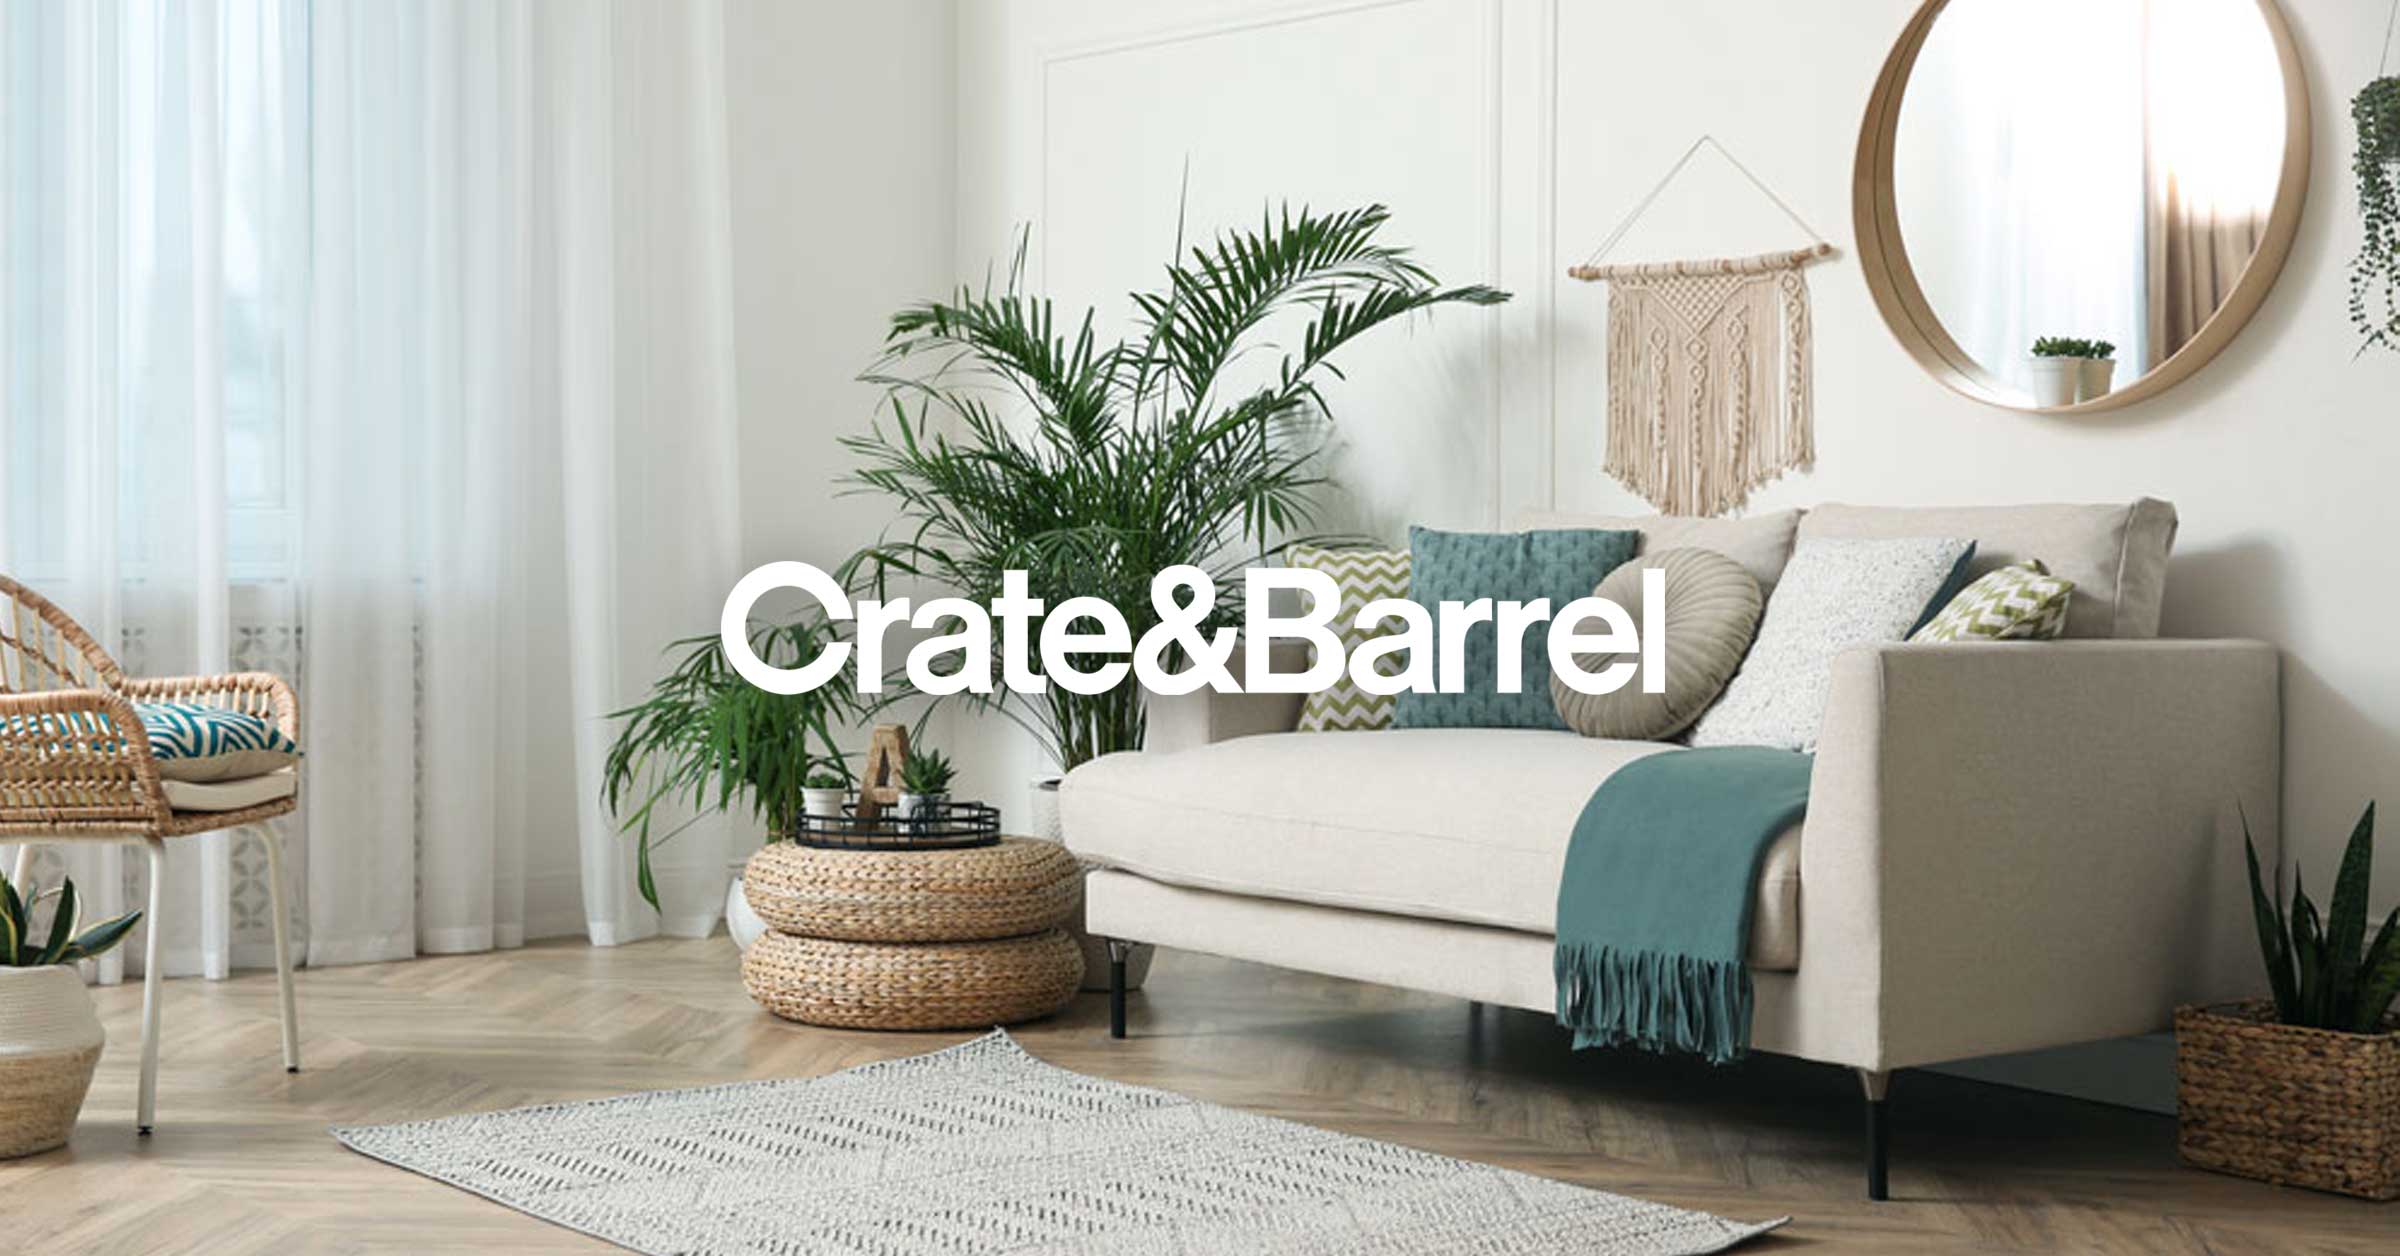 GroupBy data enrichment case study - living room furnished with Crate&Barrel like furniture